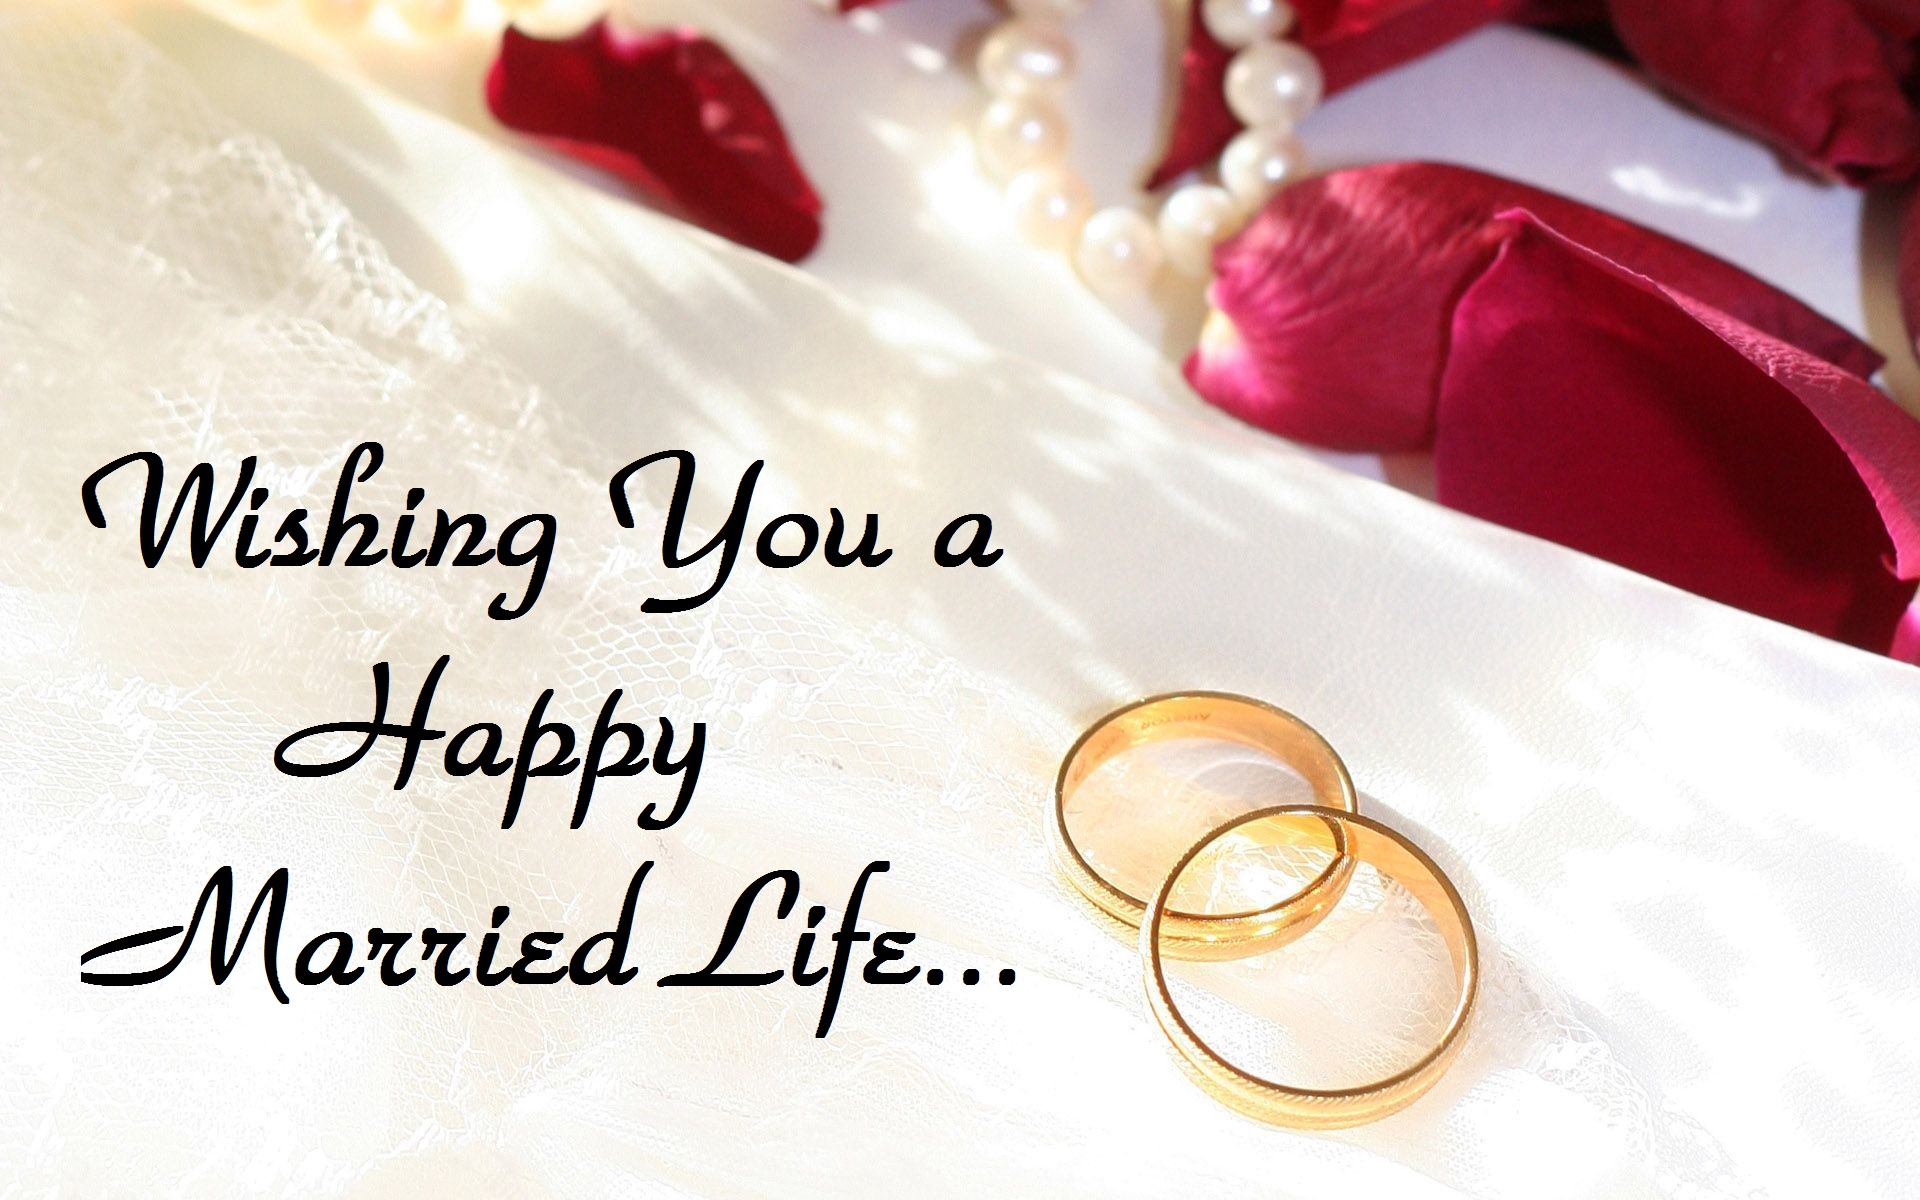 Happy Married Life Wishes & Messages Images | Wedding Wishes